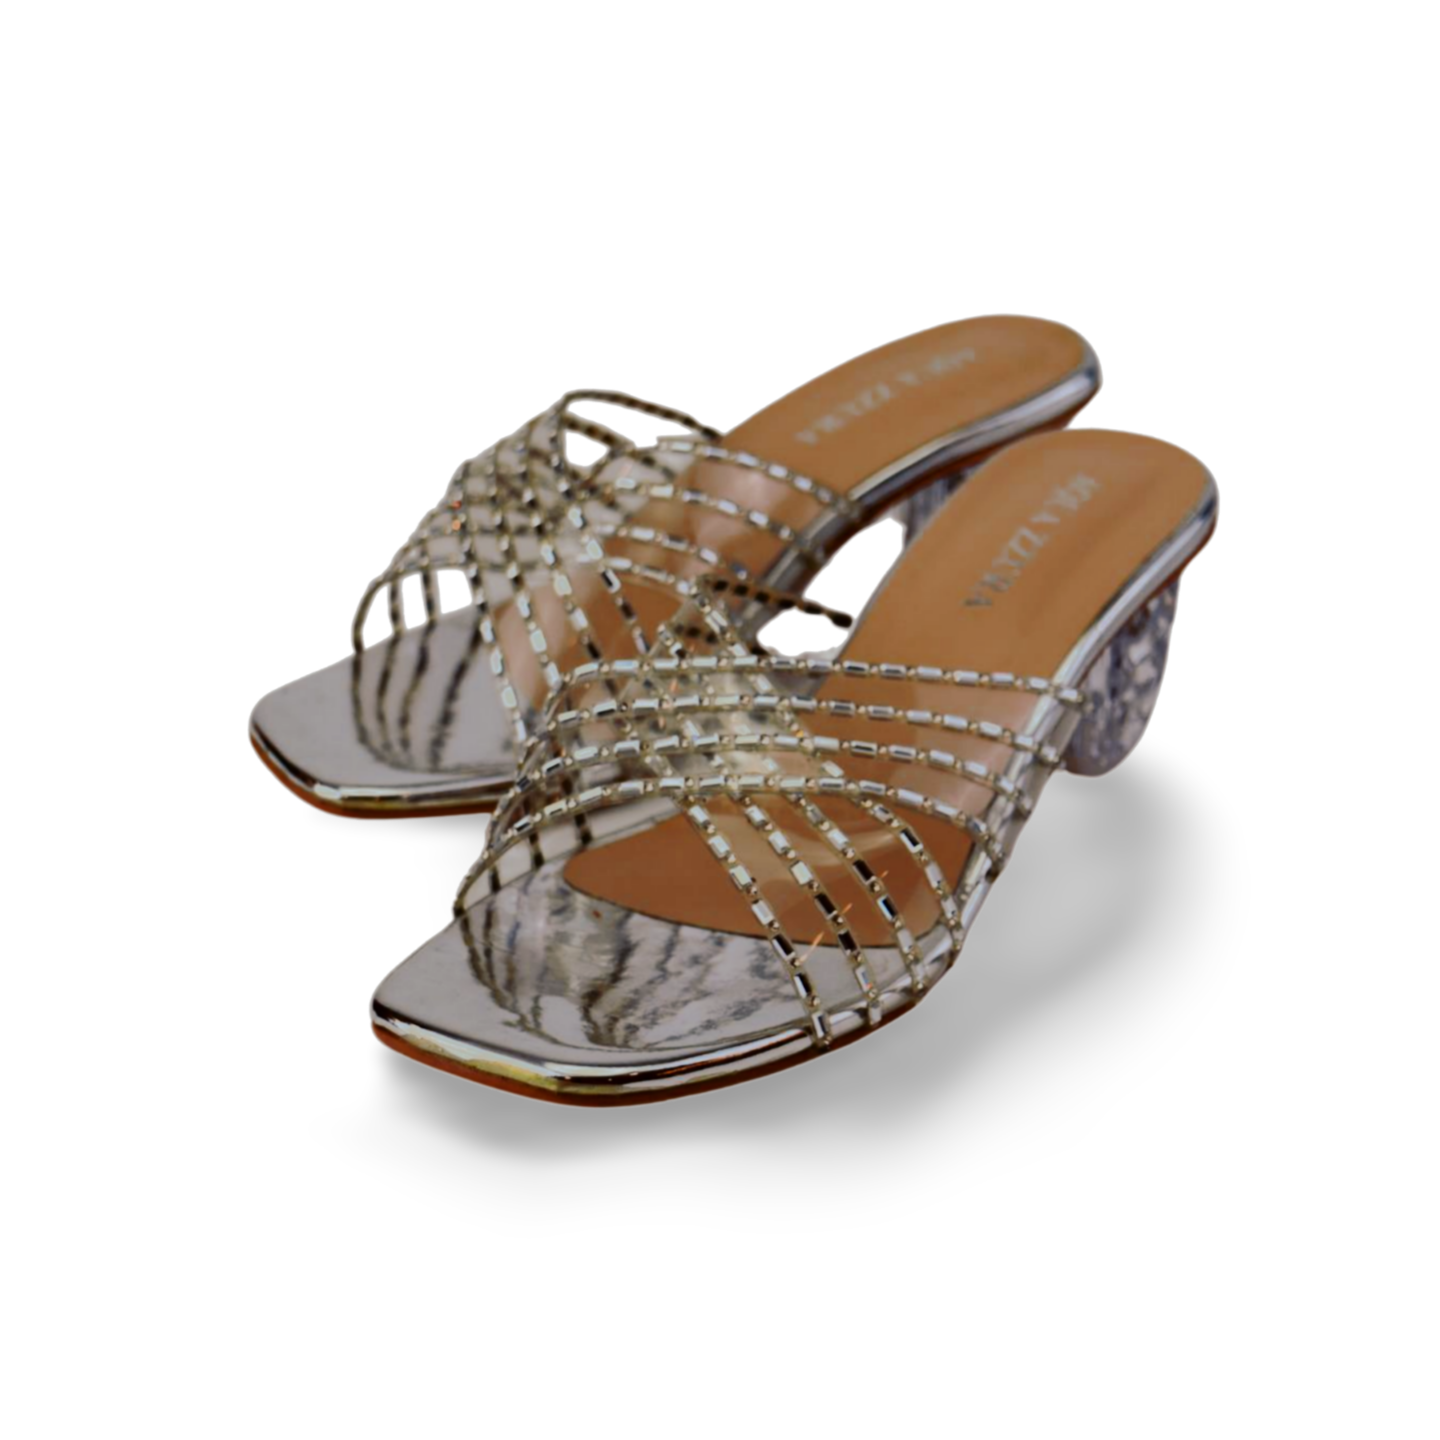 Clear Transparent Sandals with Rhinestones